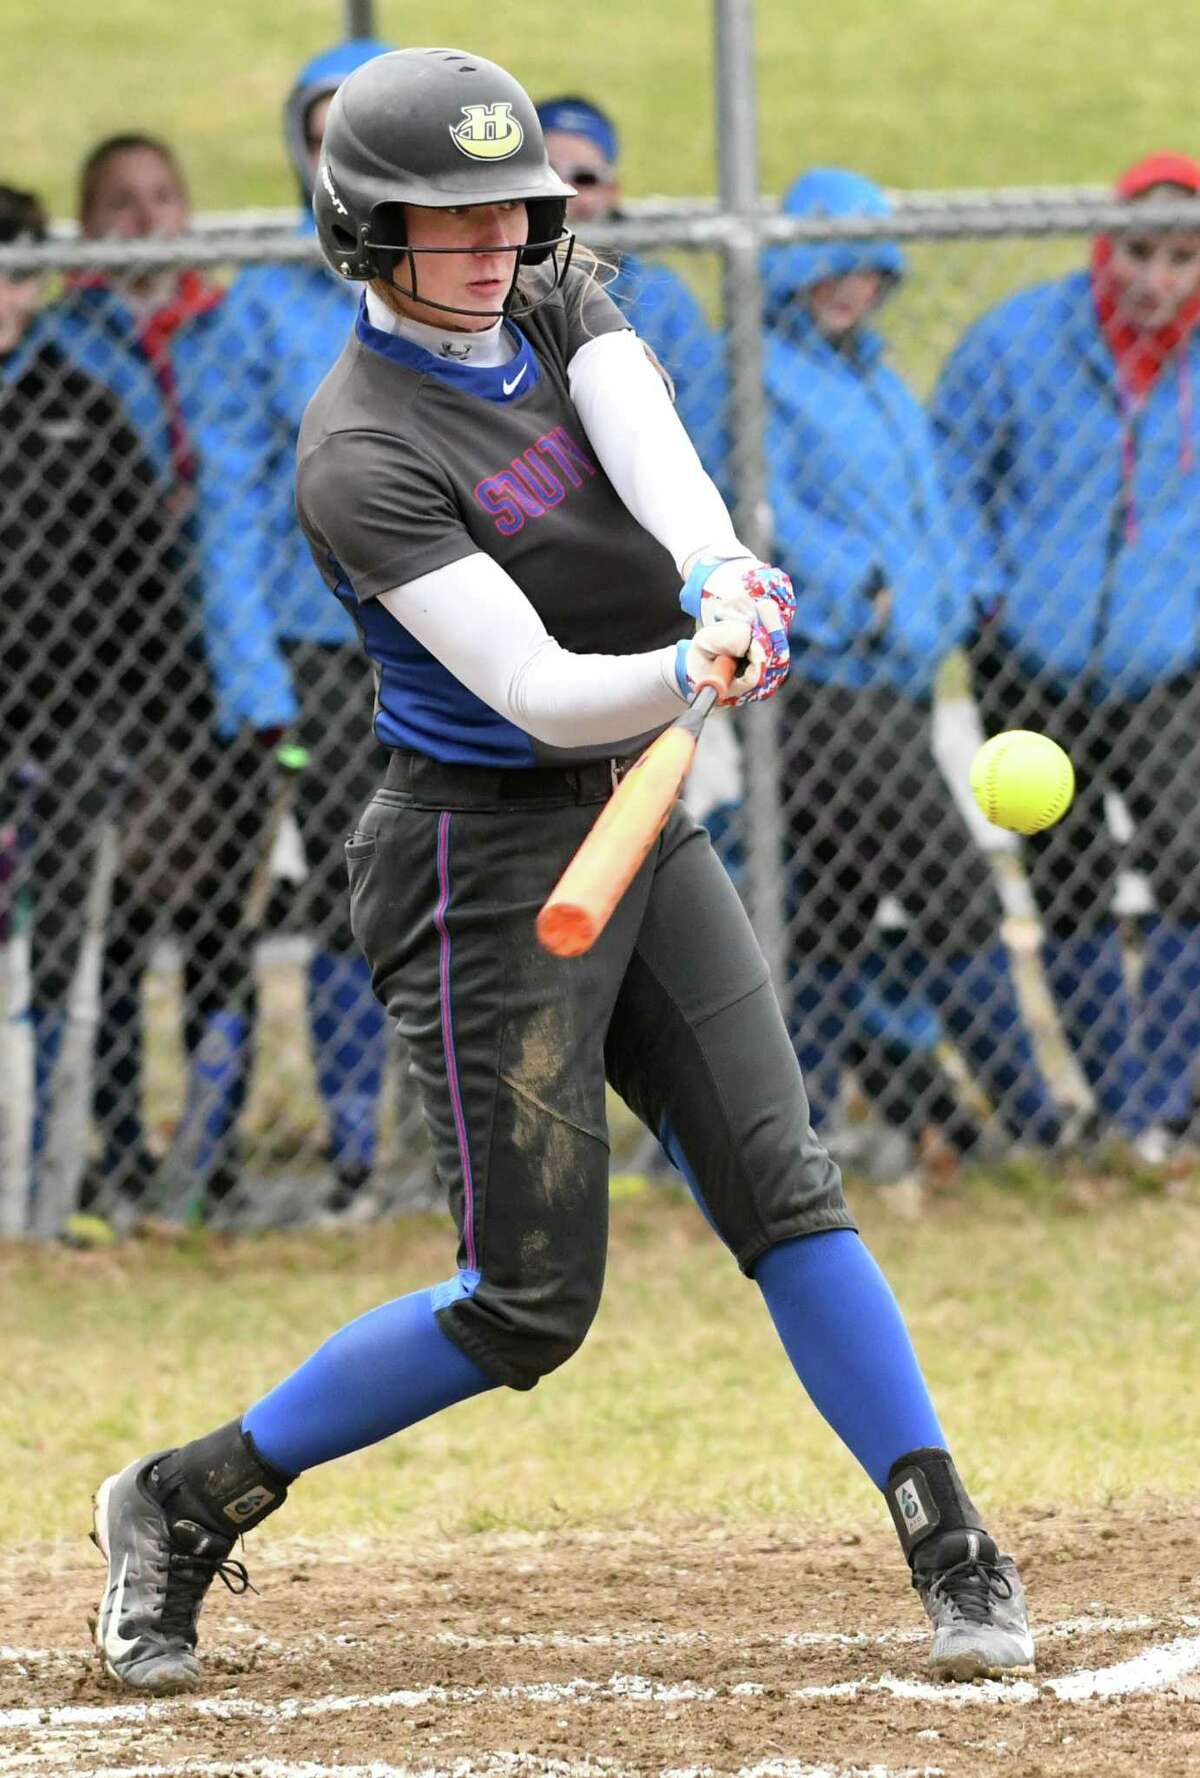 South Glens Falls Celyna Shaw takes a swing at pitch during a softball game against Burnt Hills on Tuesday, April 17, 2018 in Burnt Hills, N.Y. (Lori Van Buren/Times Union)